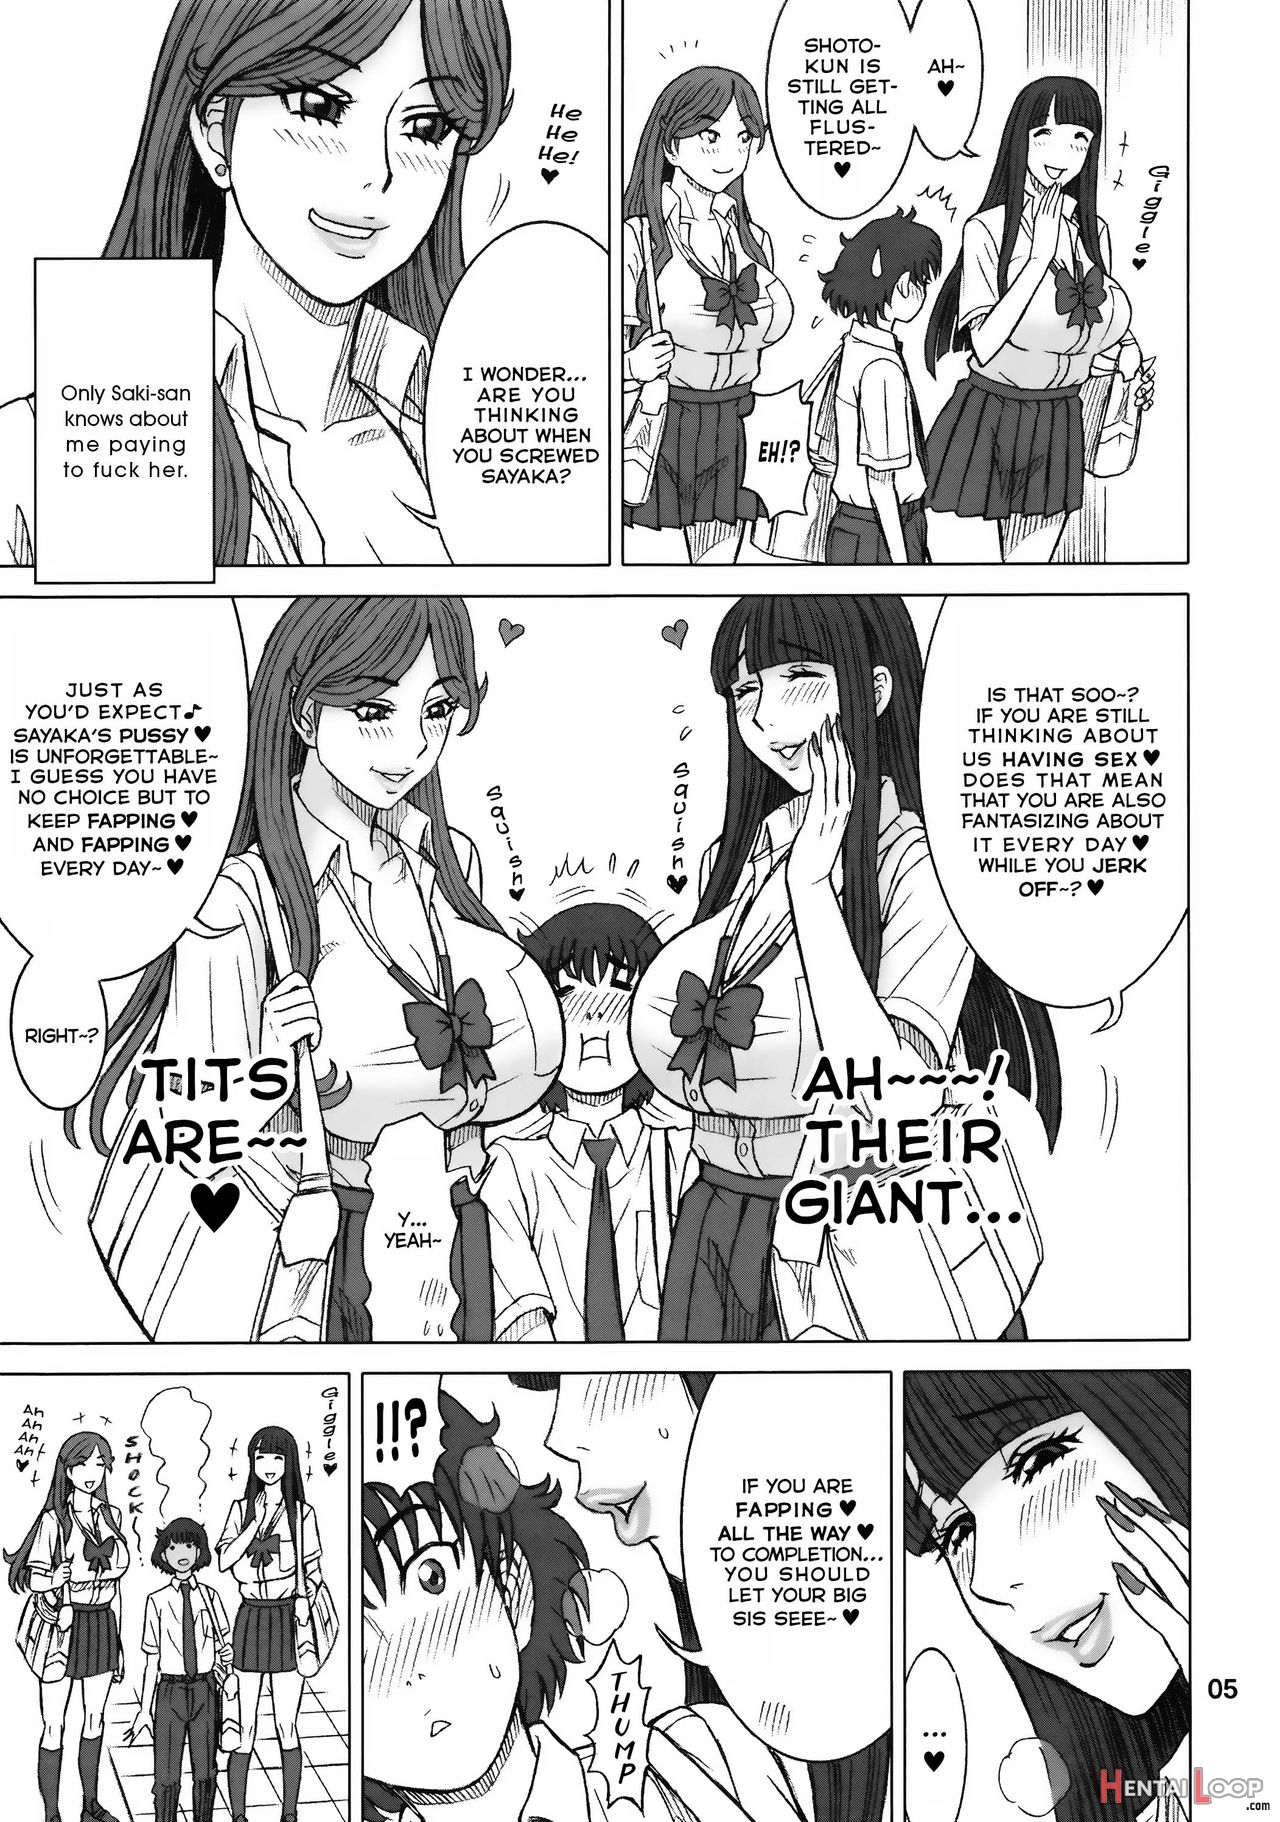 Buying A Classmate Story ~afterwards~ page 4